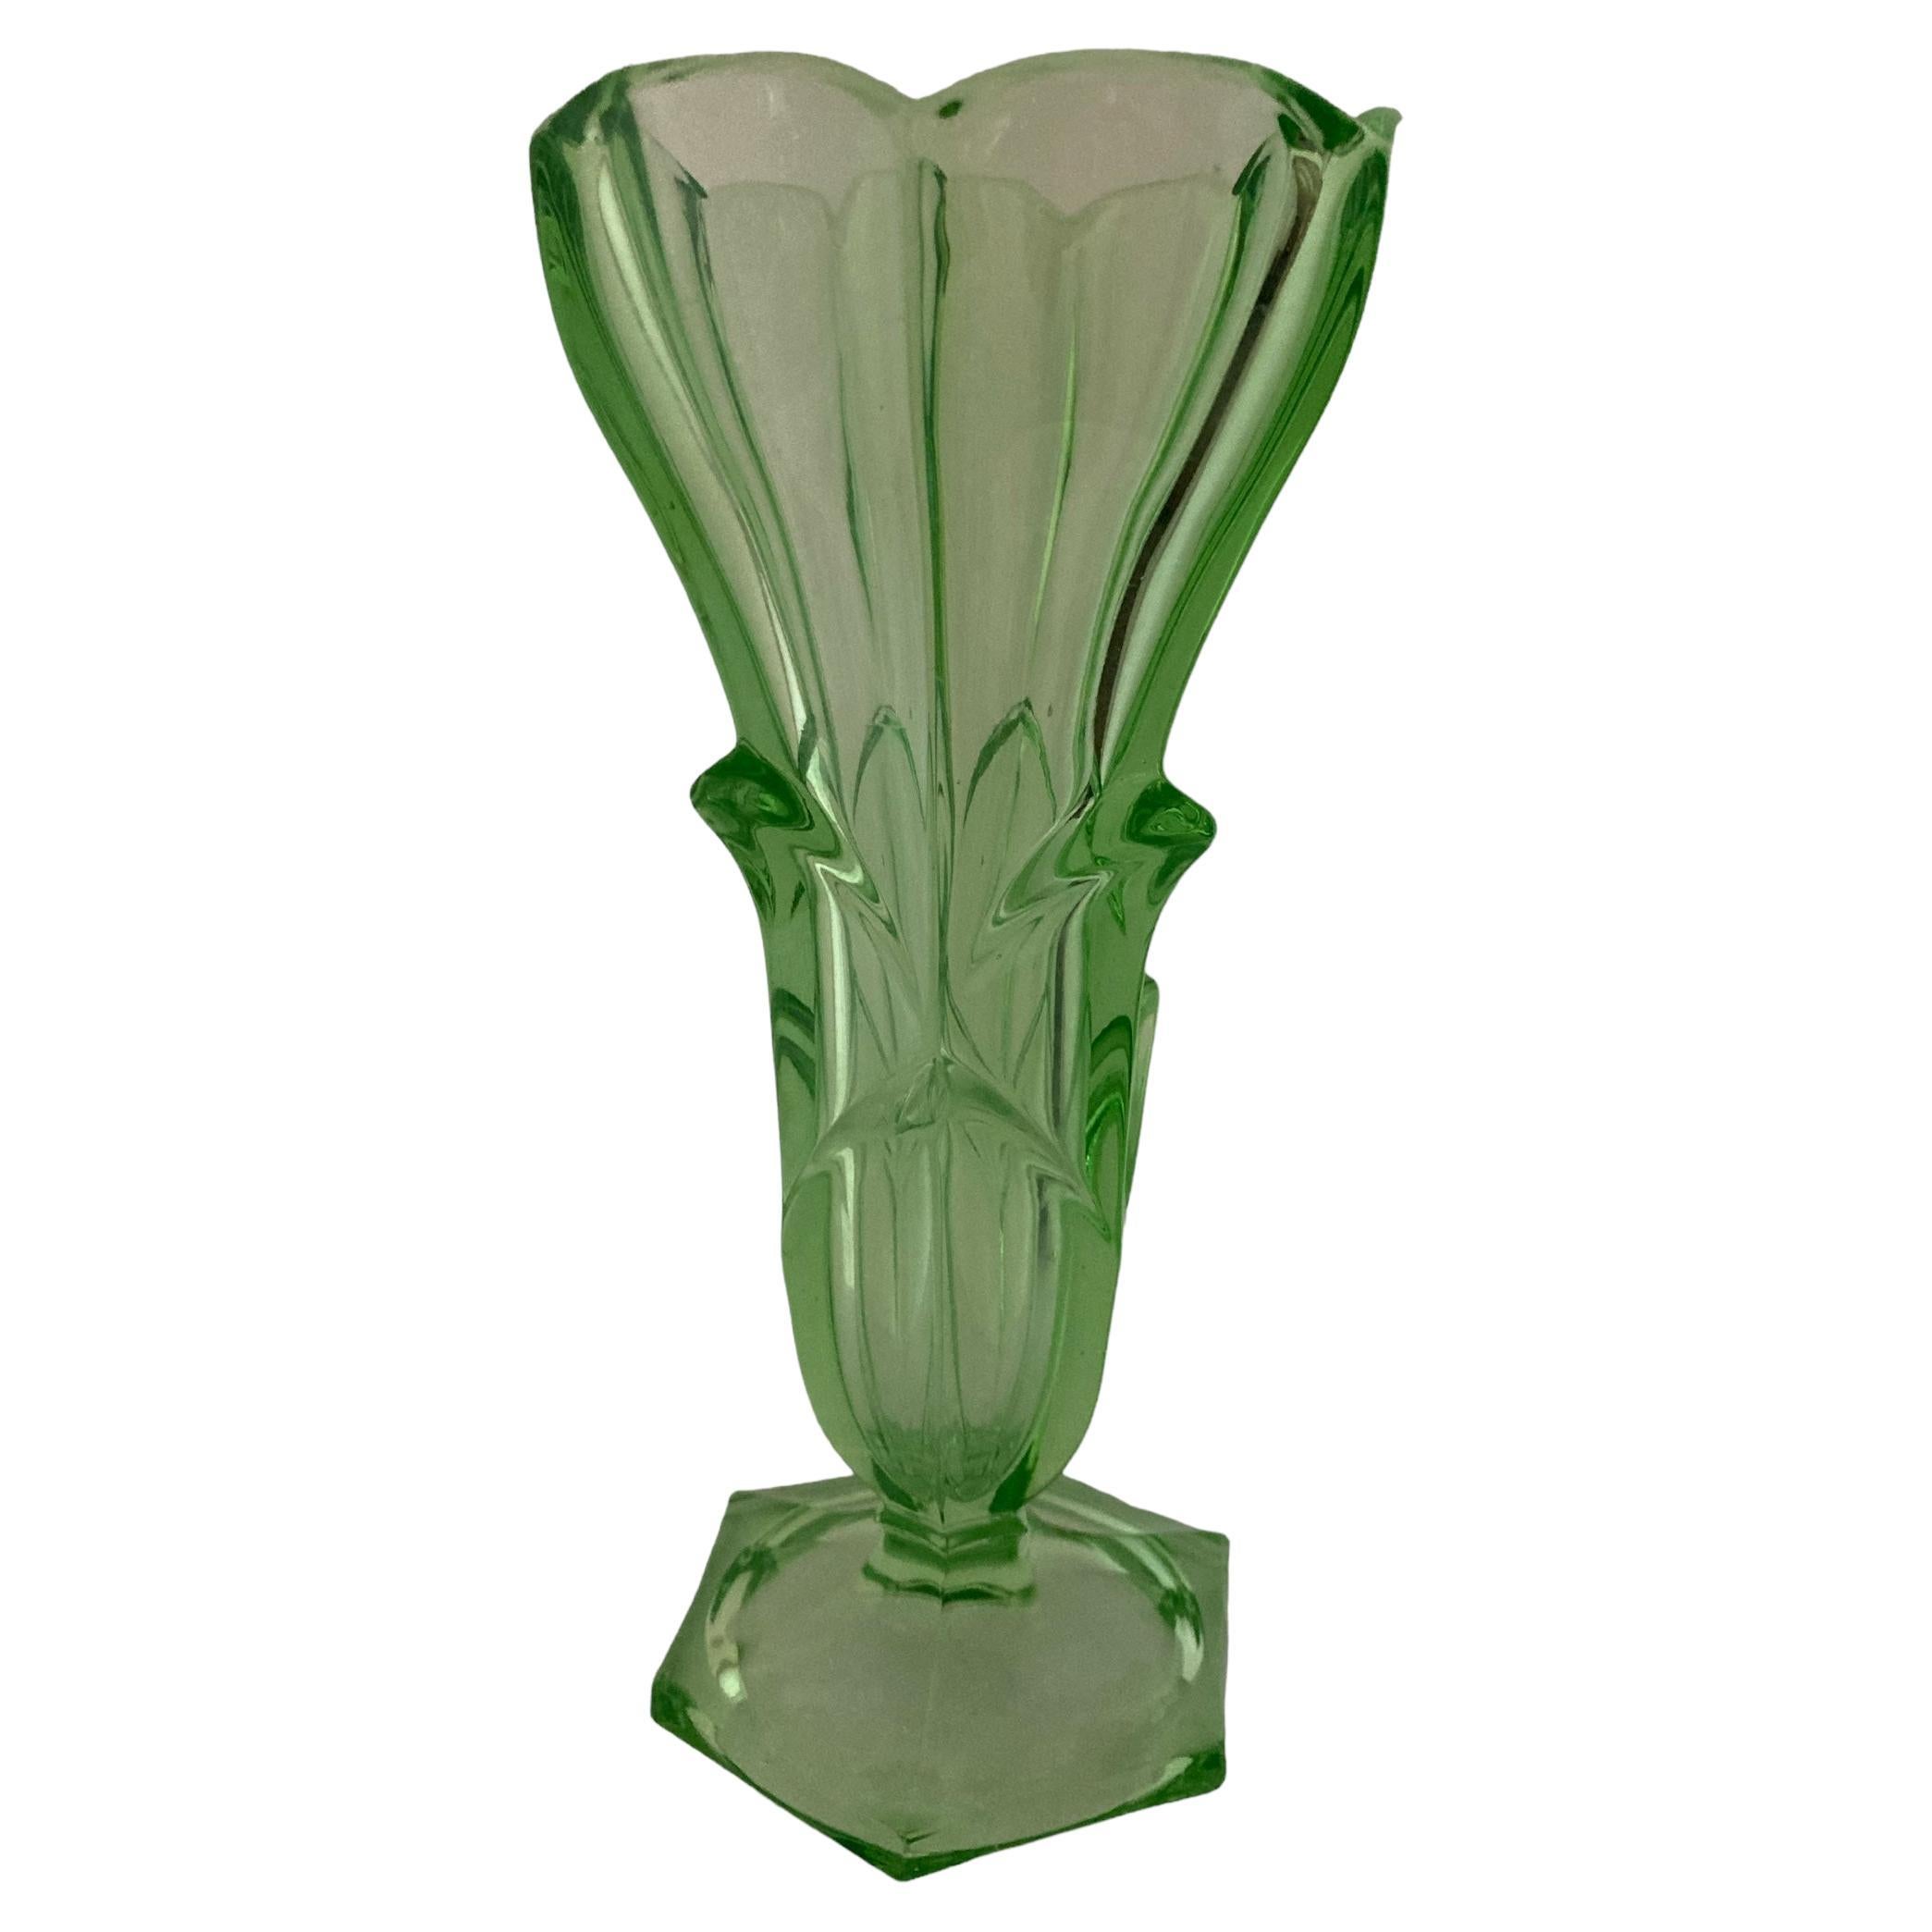 An exquisite green uranium glass vase with a captivating flower design For Sale